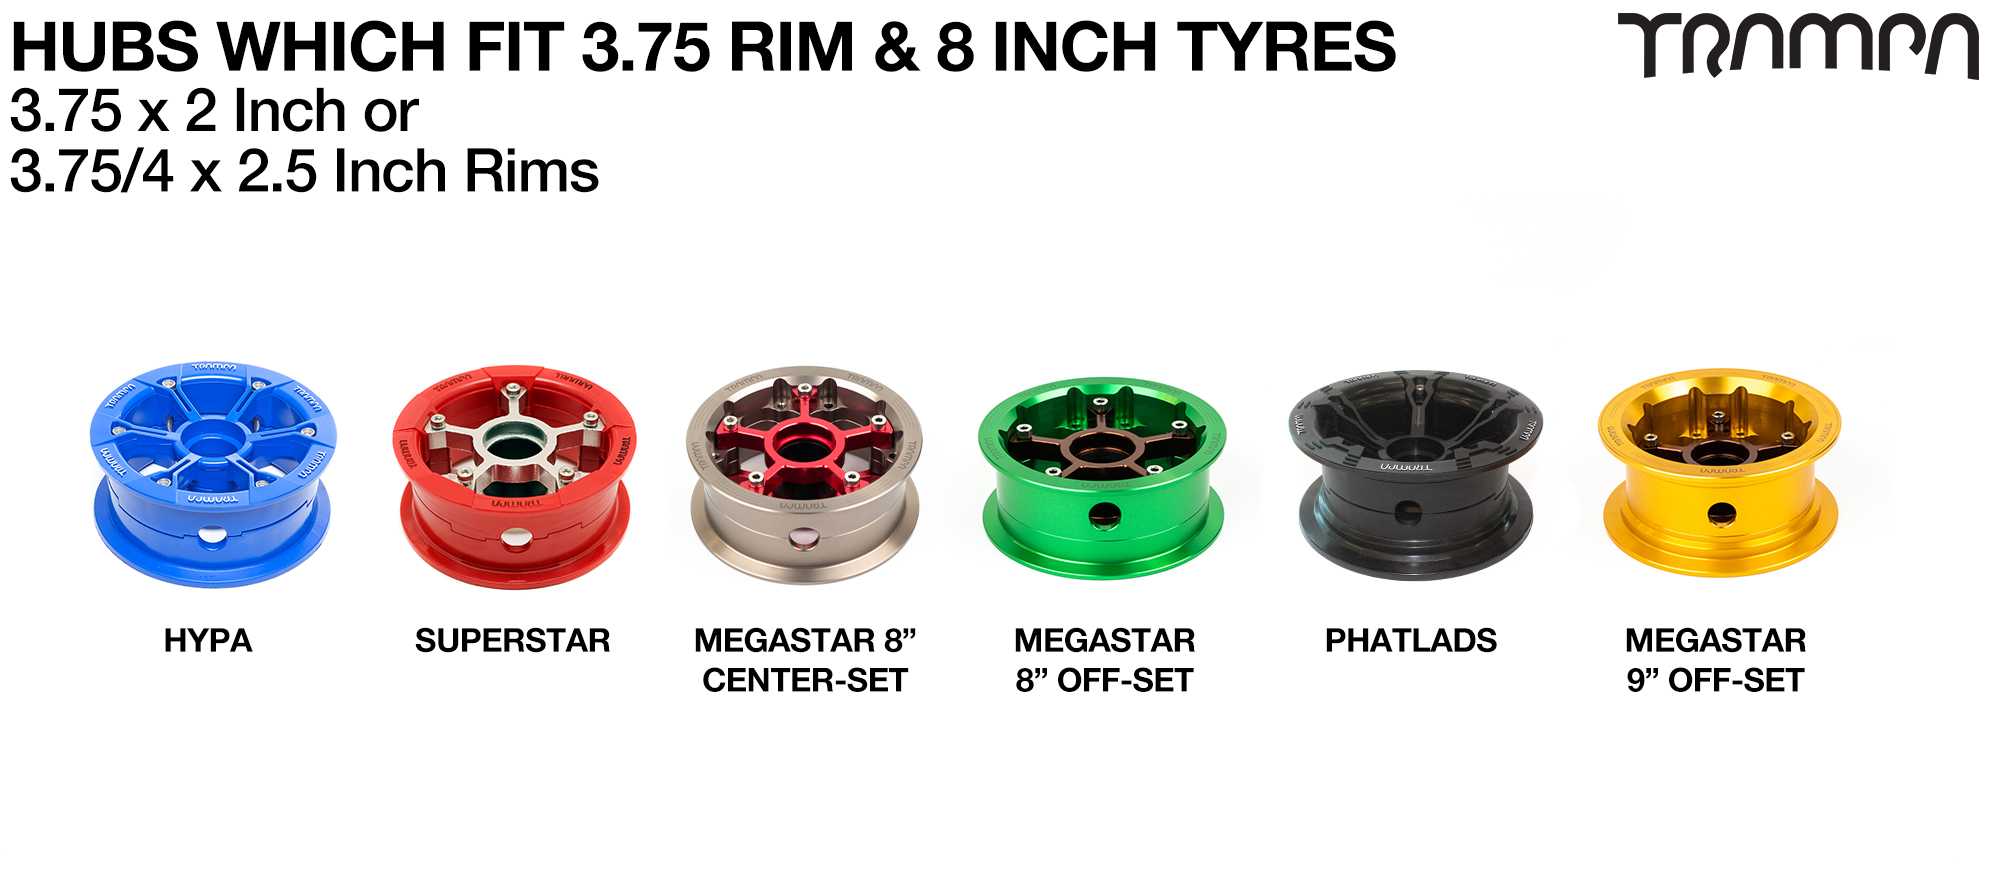 TRAMPA's OFF-SET MEGASTAR 9 hubs will also fit with any of the 3.75 inch rimmed 8 inch Tyres making them the widest 8 Inch wheel on the planet!!